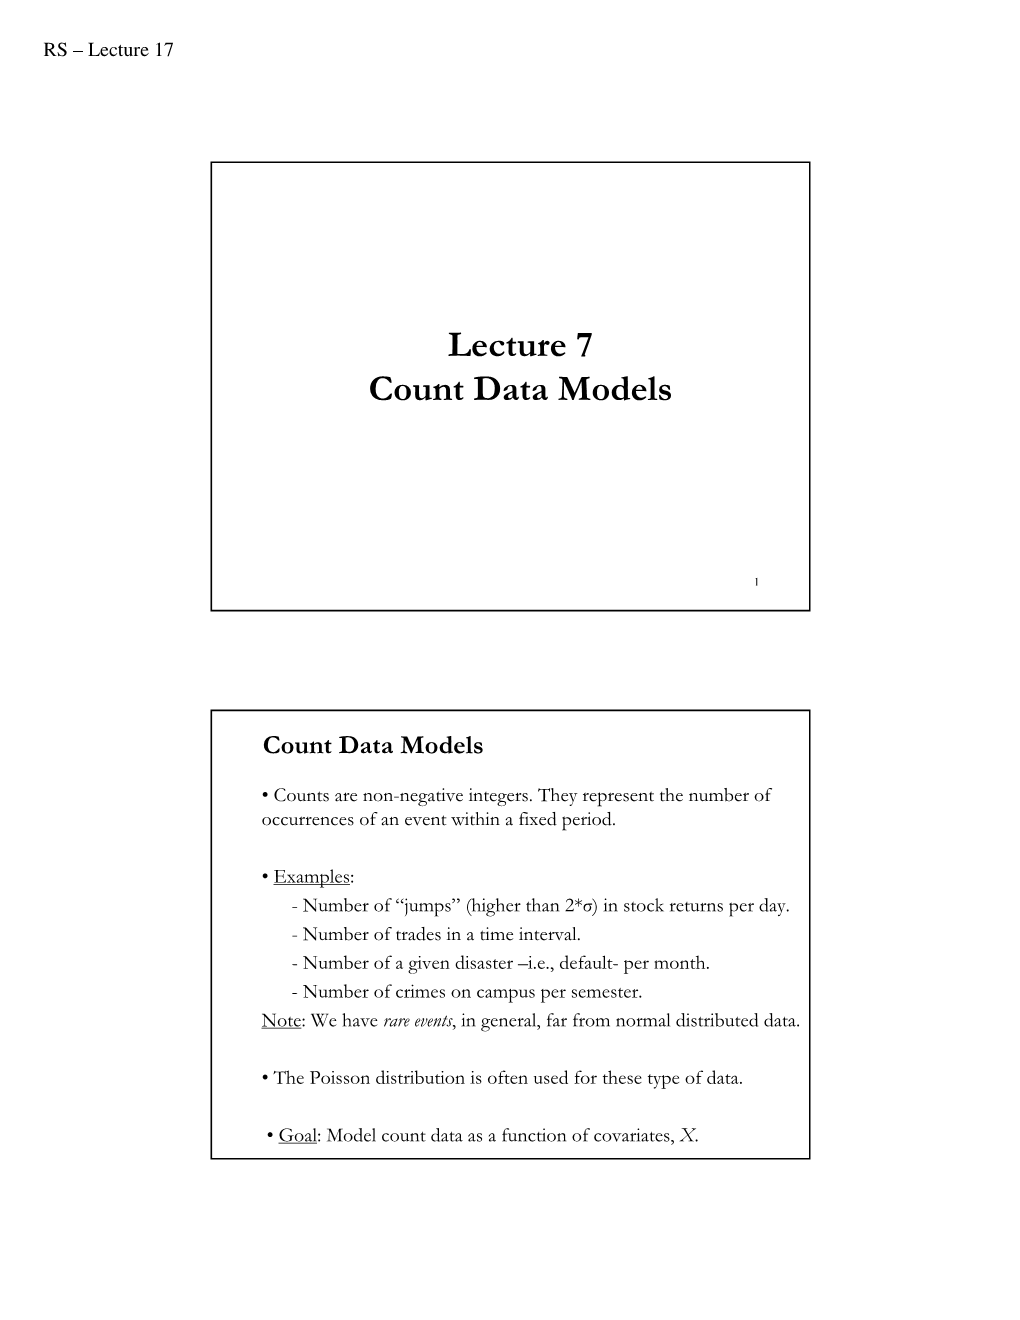 Lecture 7 Count Data Models